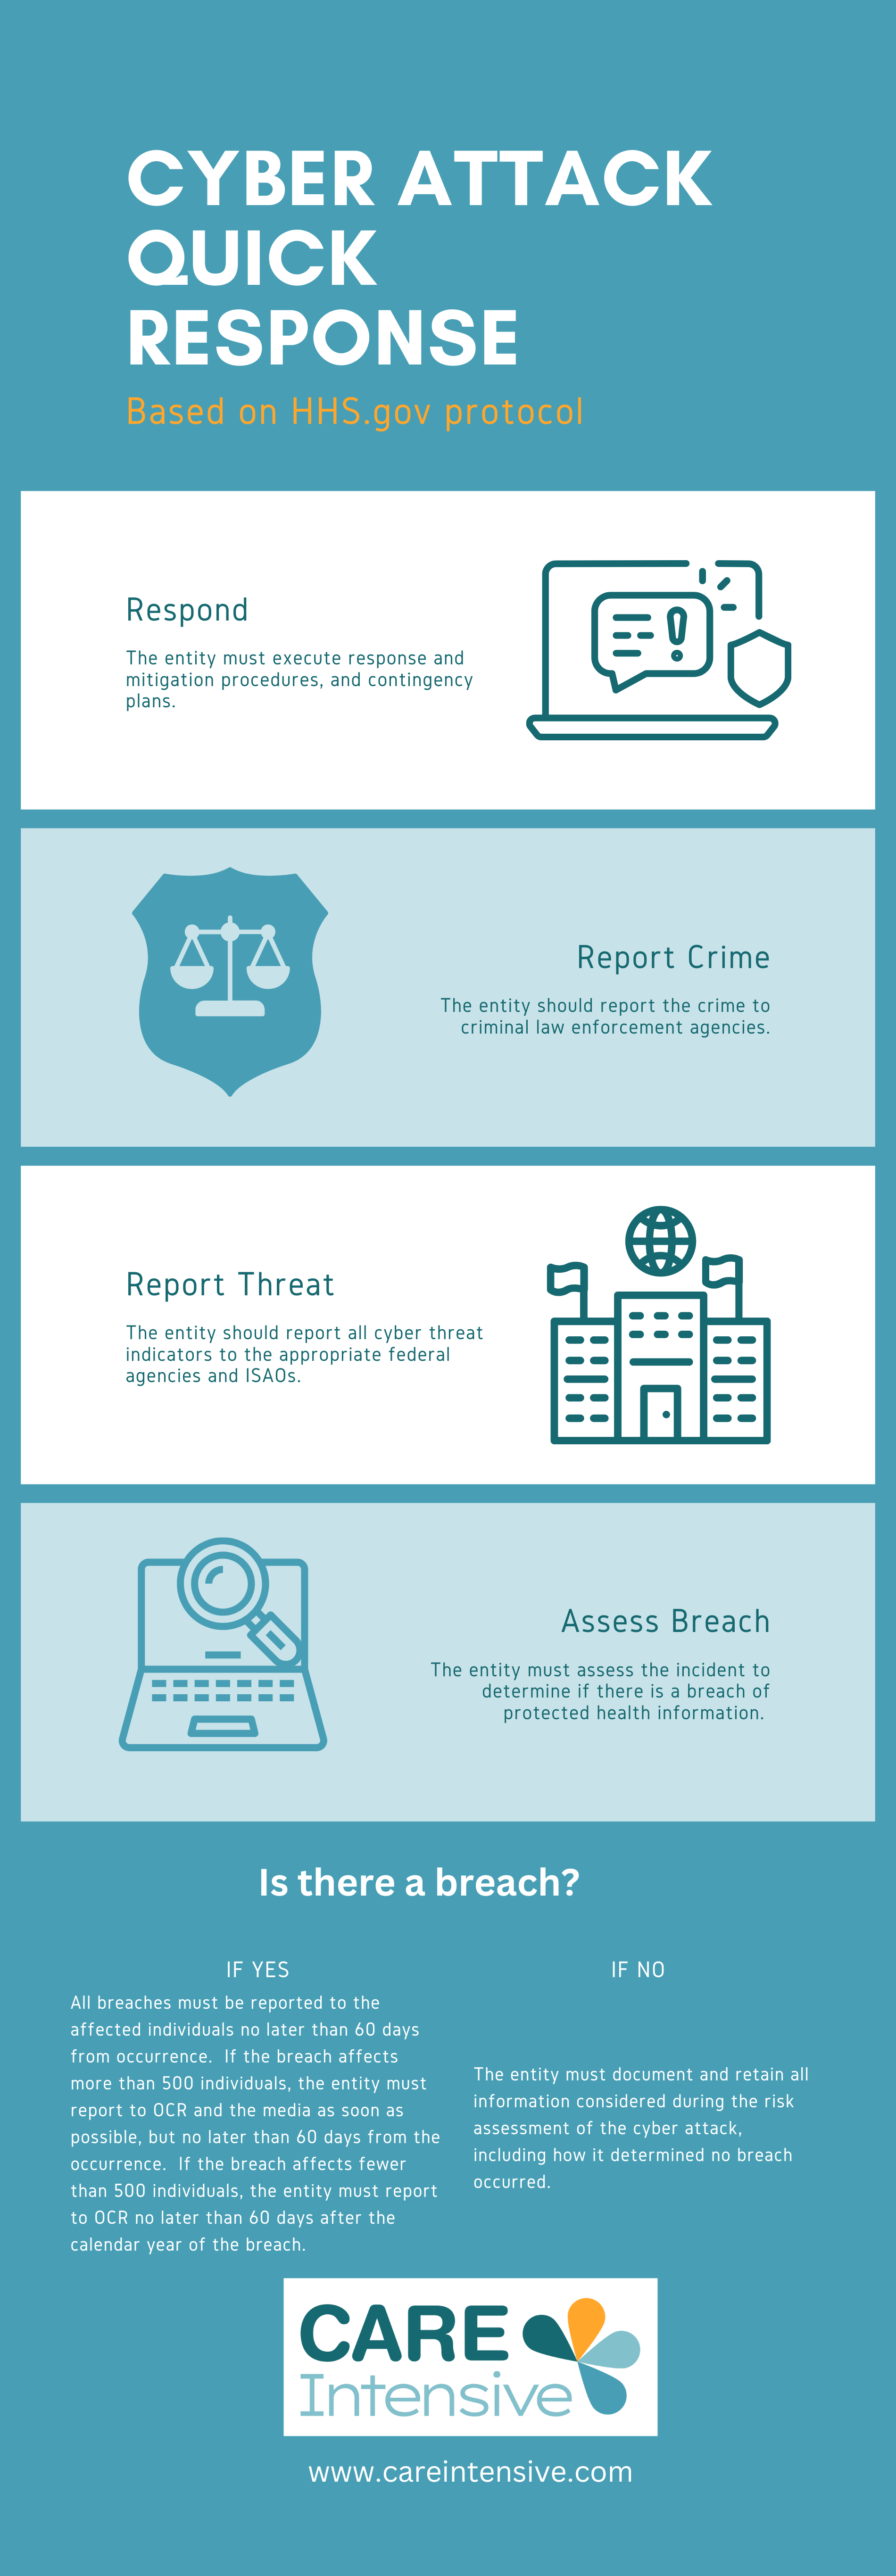 HHS.gov Cyber Attack Quick Response Guide